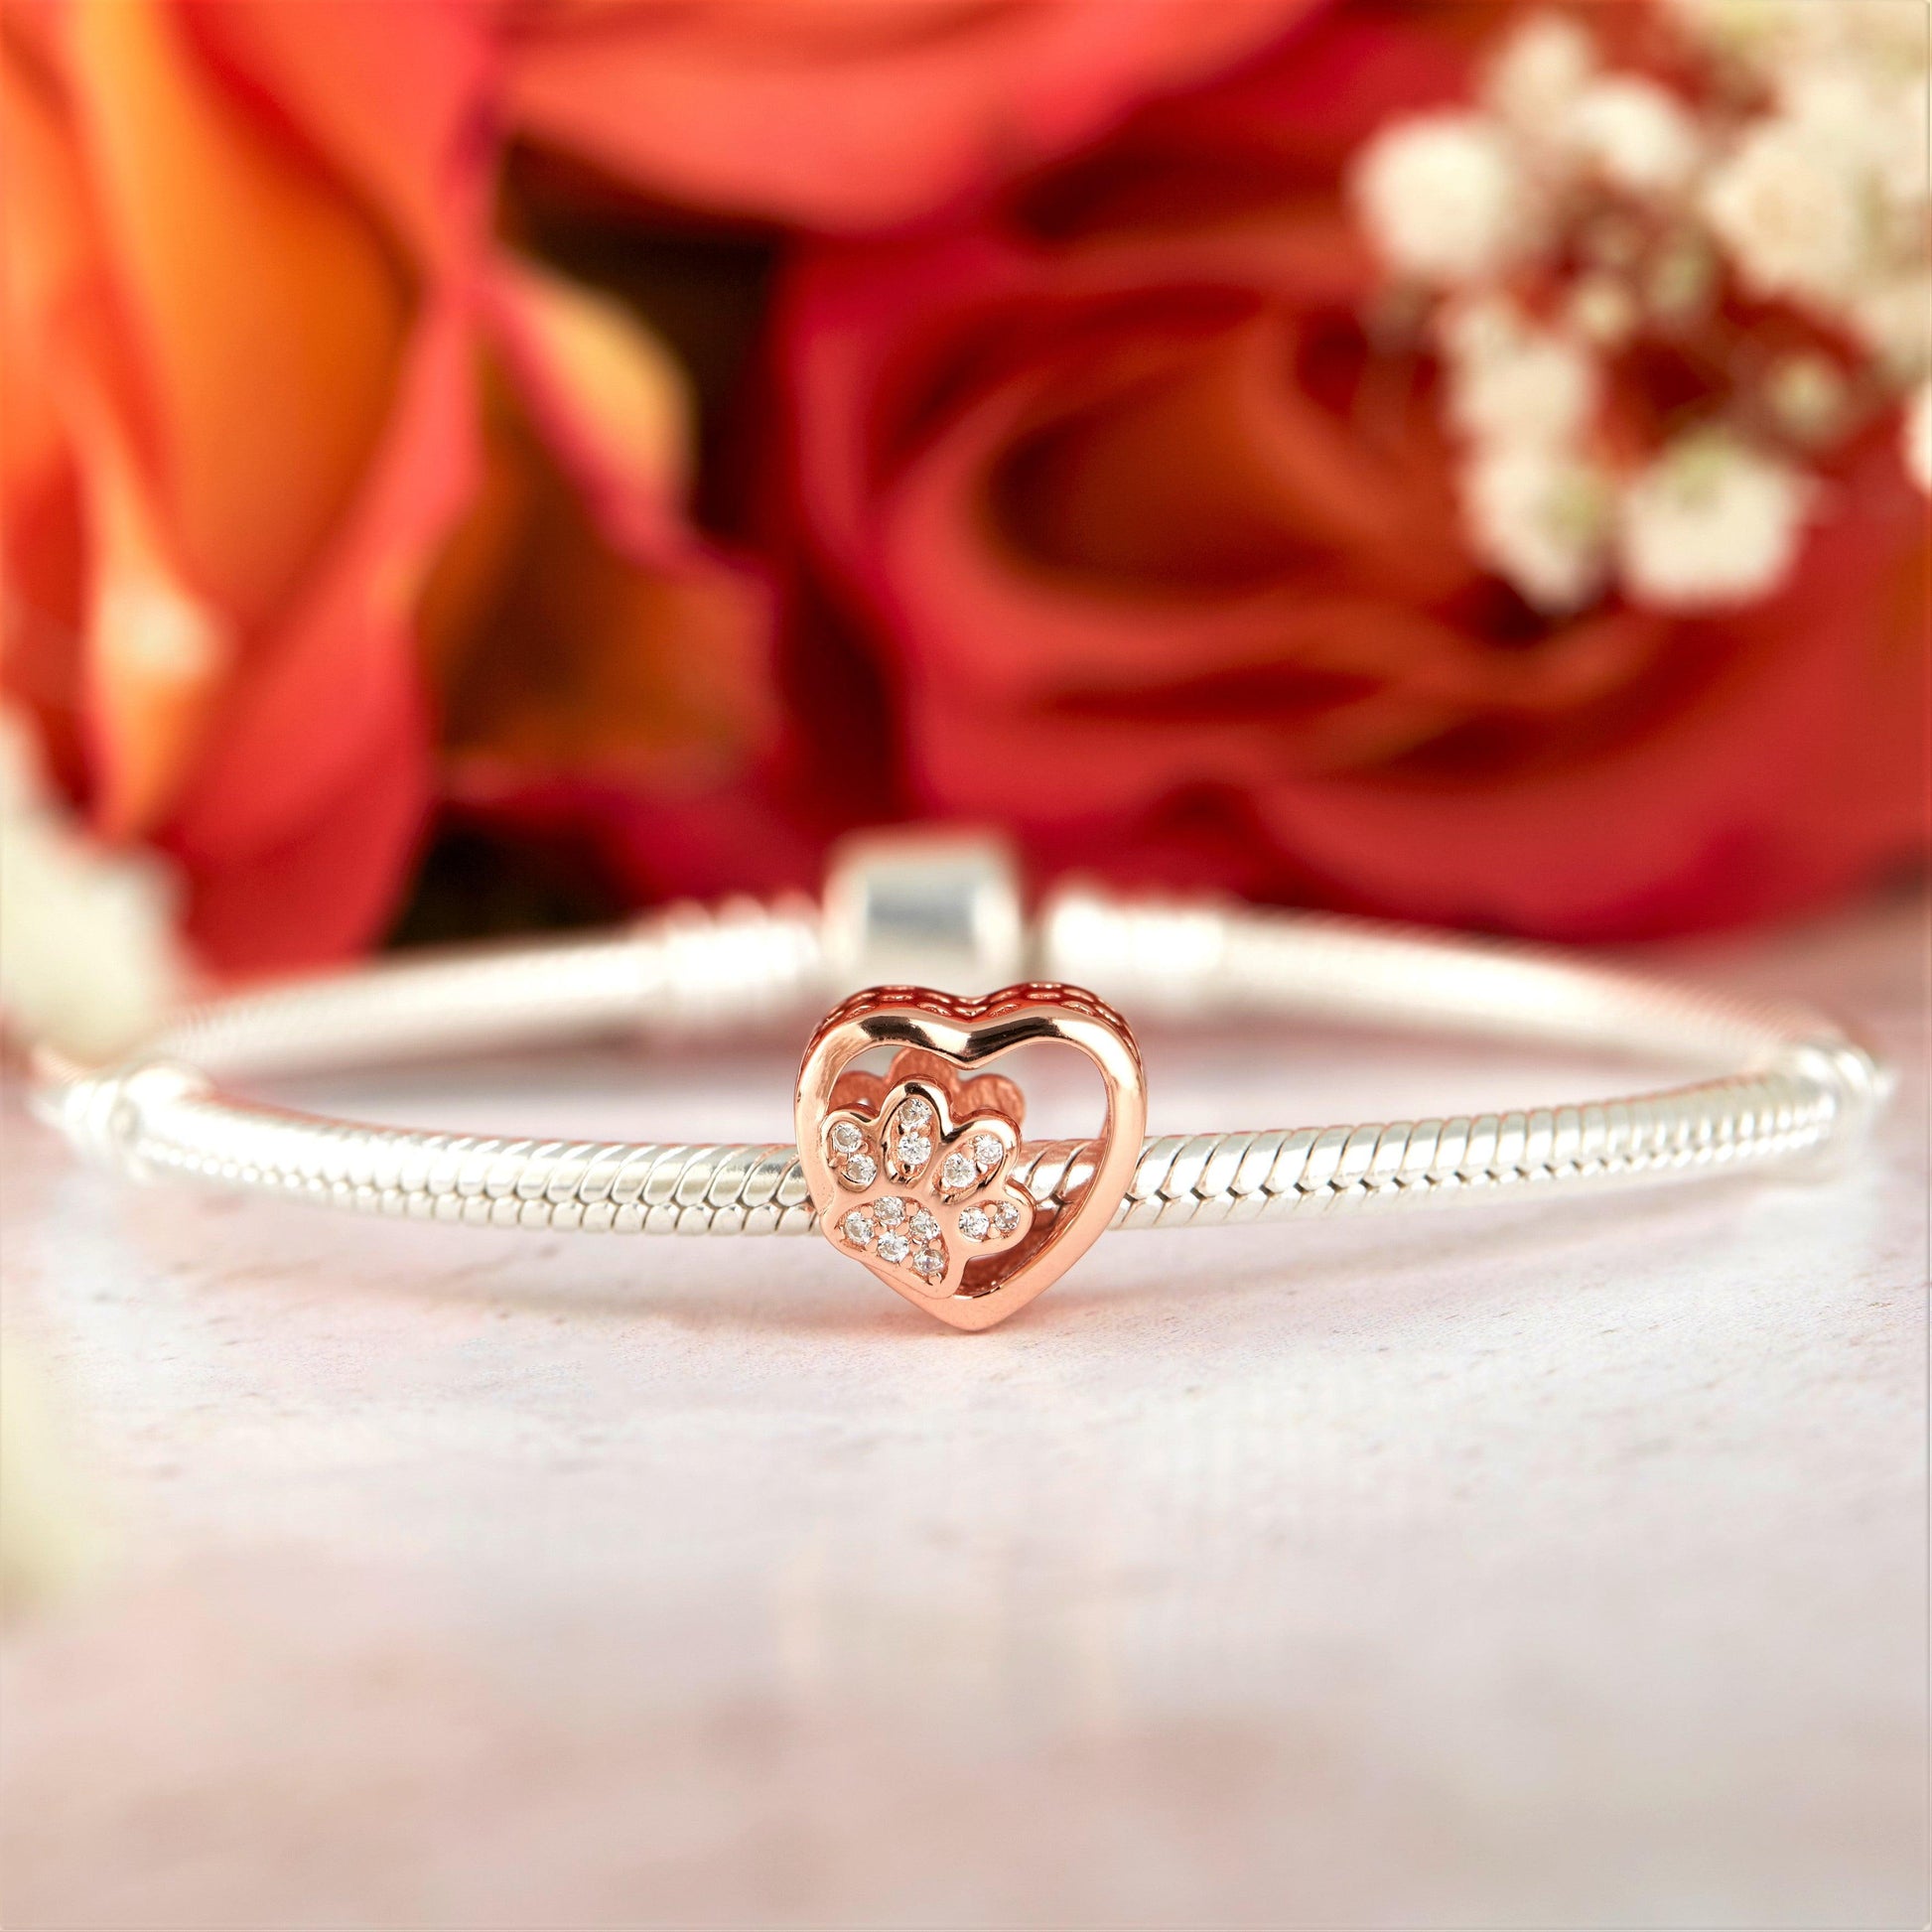 Paw Charm - 925 Sterling Silver with rose gold plating & Cubic Zircons, this super cute heart charm with a paw at its center.